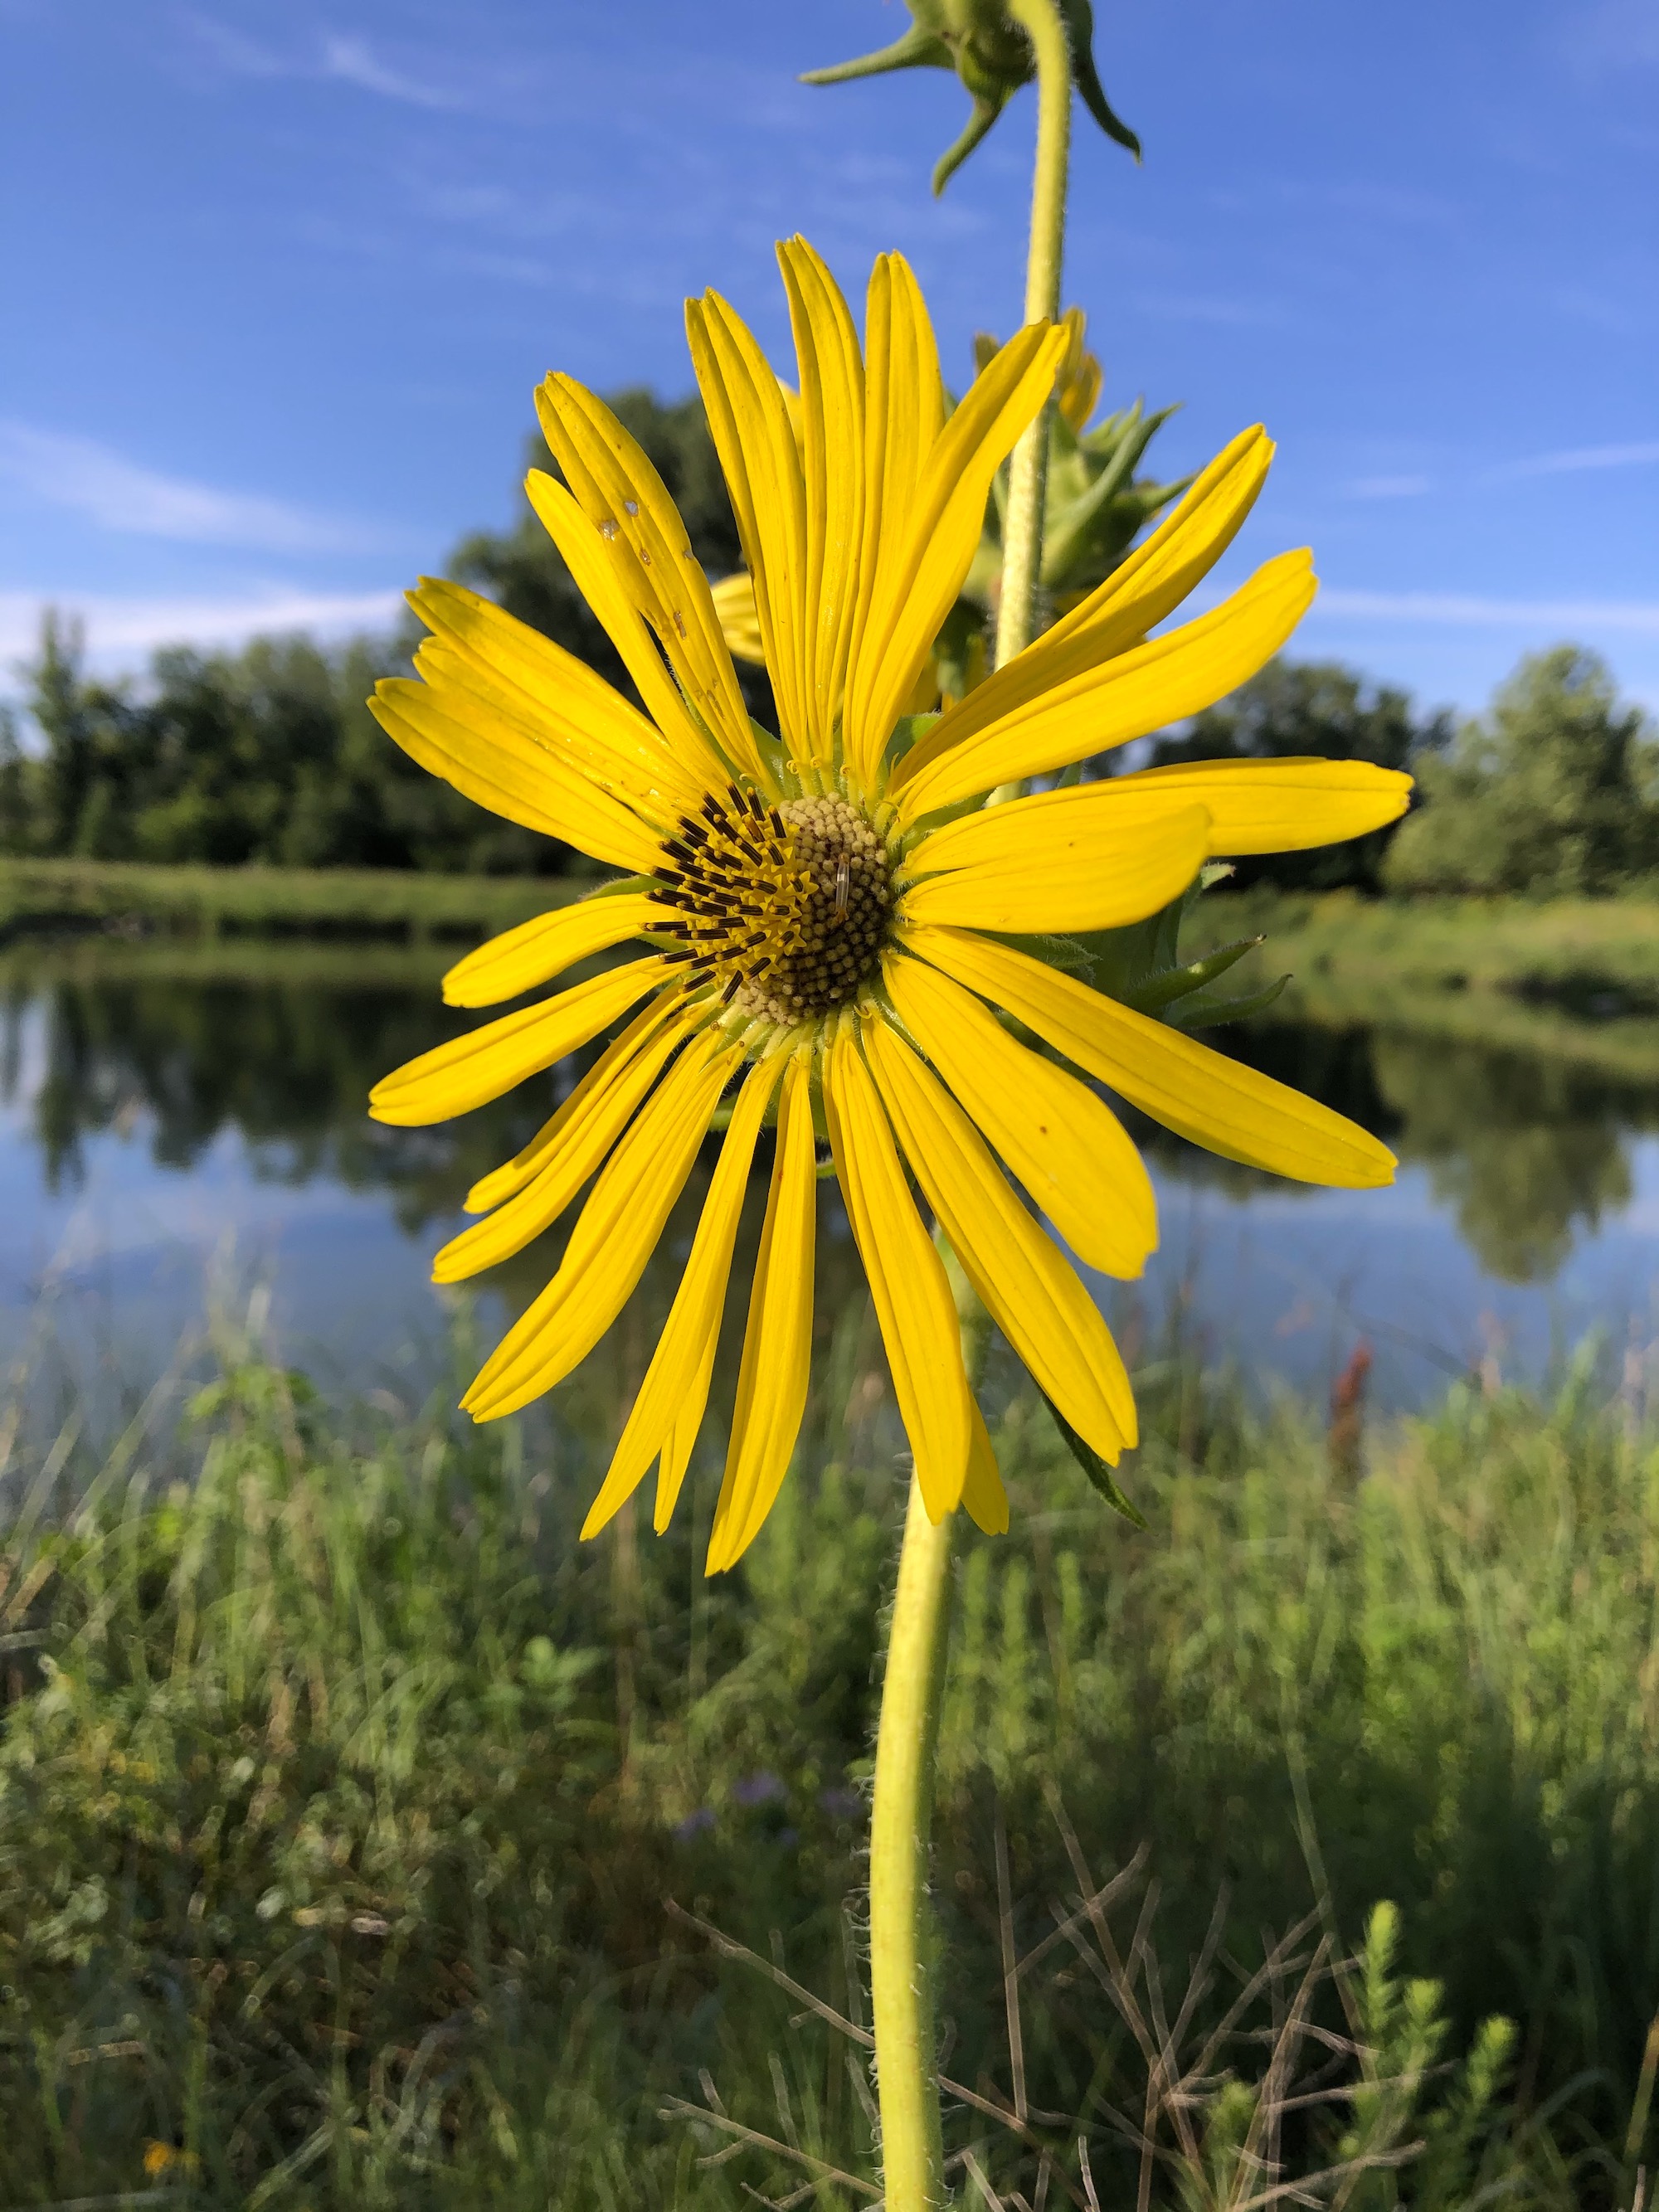 Compass Plant on the shore of the retaining pond on the corner of Nakoma Road and Manitou Way in Madison, Wisconsin on July 31, 2020.